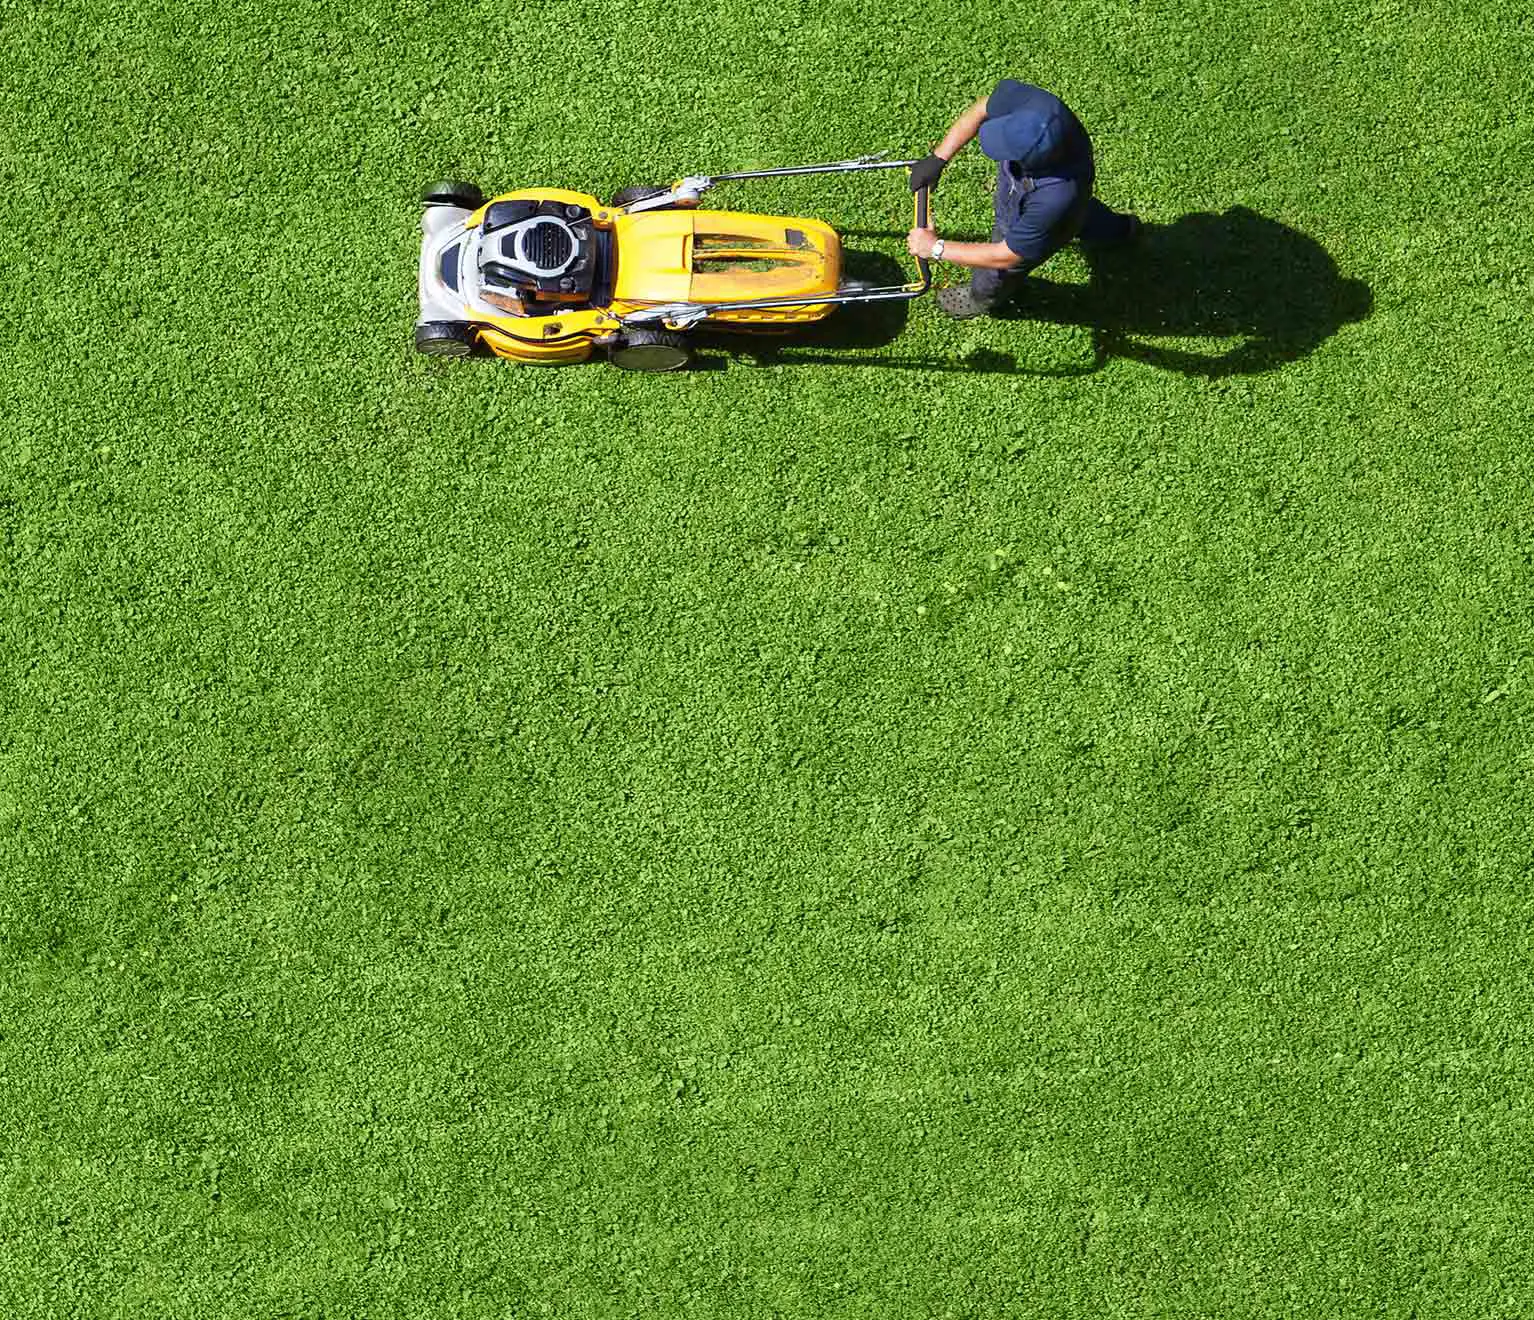 Learn How to Properly Mow Your Lawn